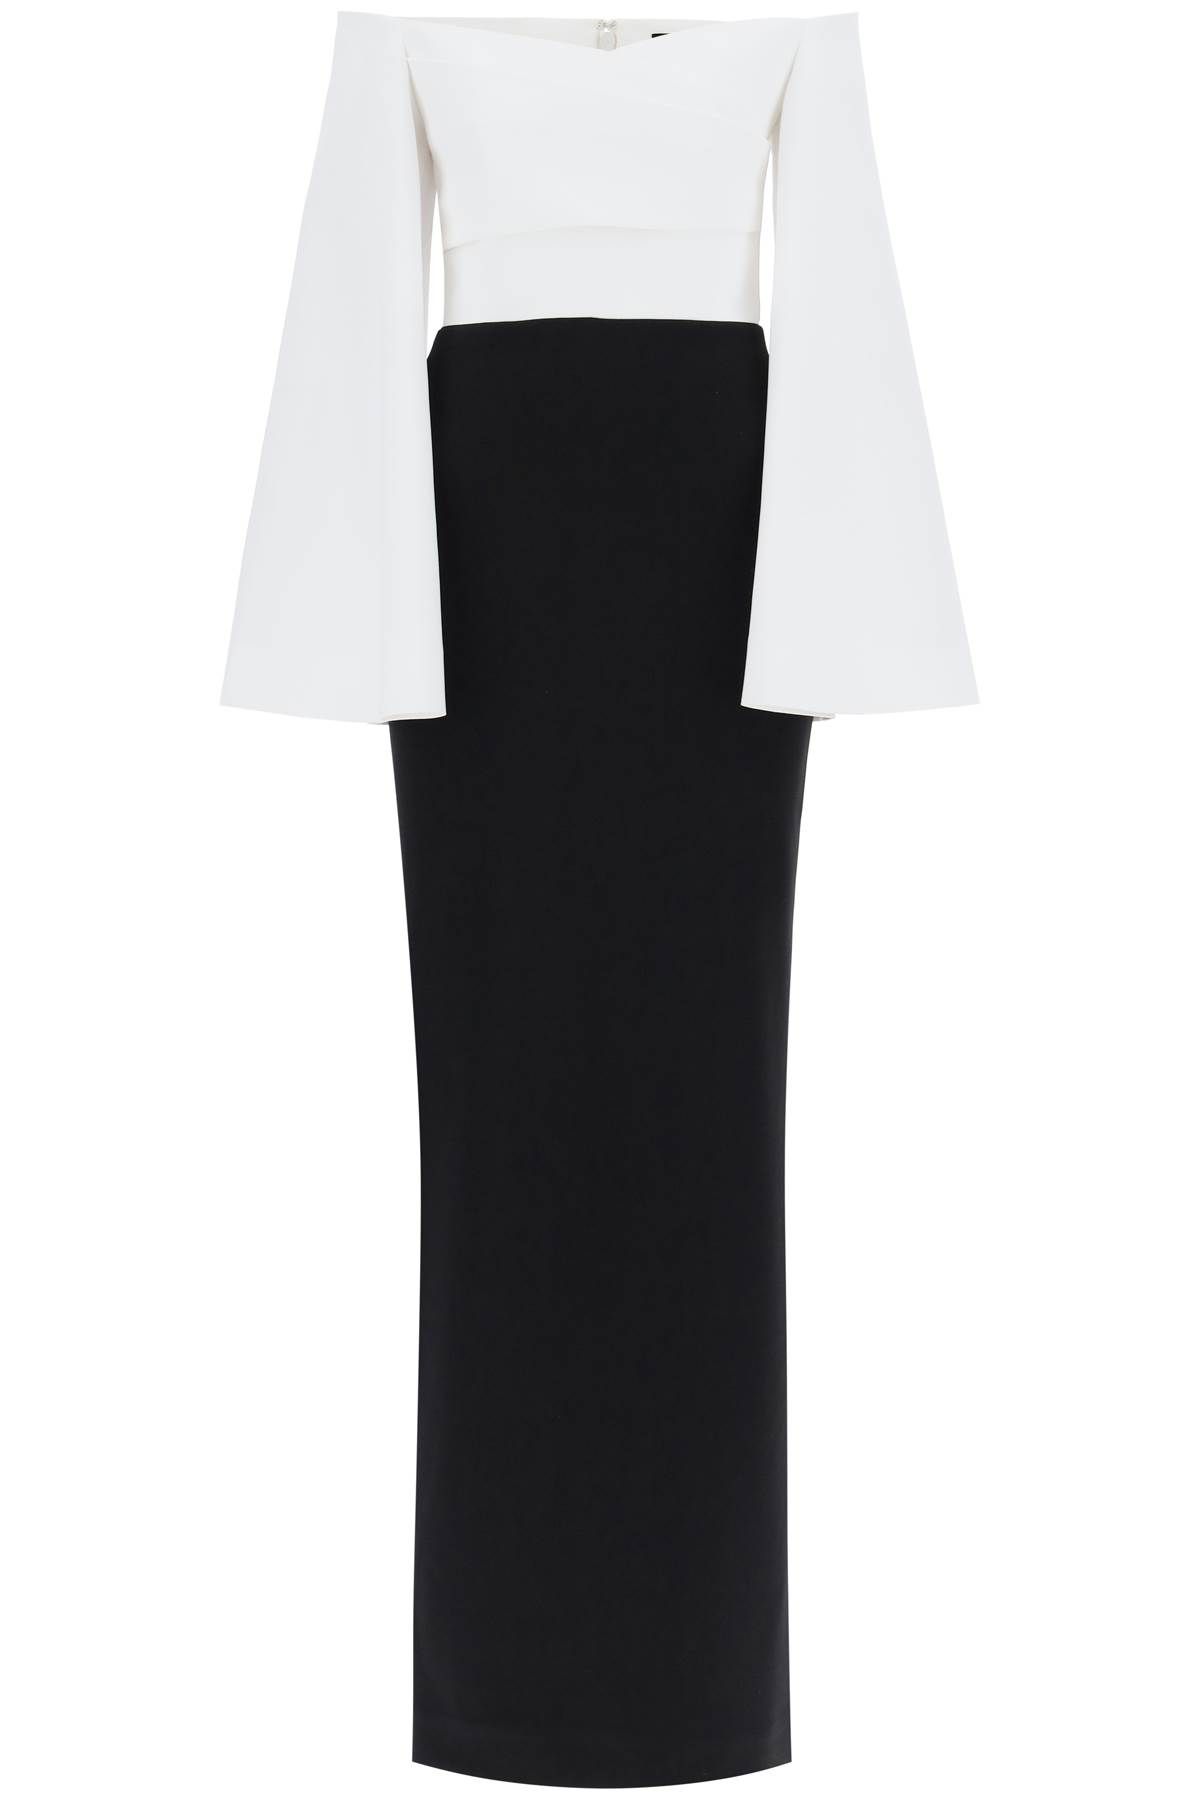 Shop Solace London Maxi Dress Eliana With Flared In Black,white